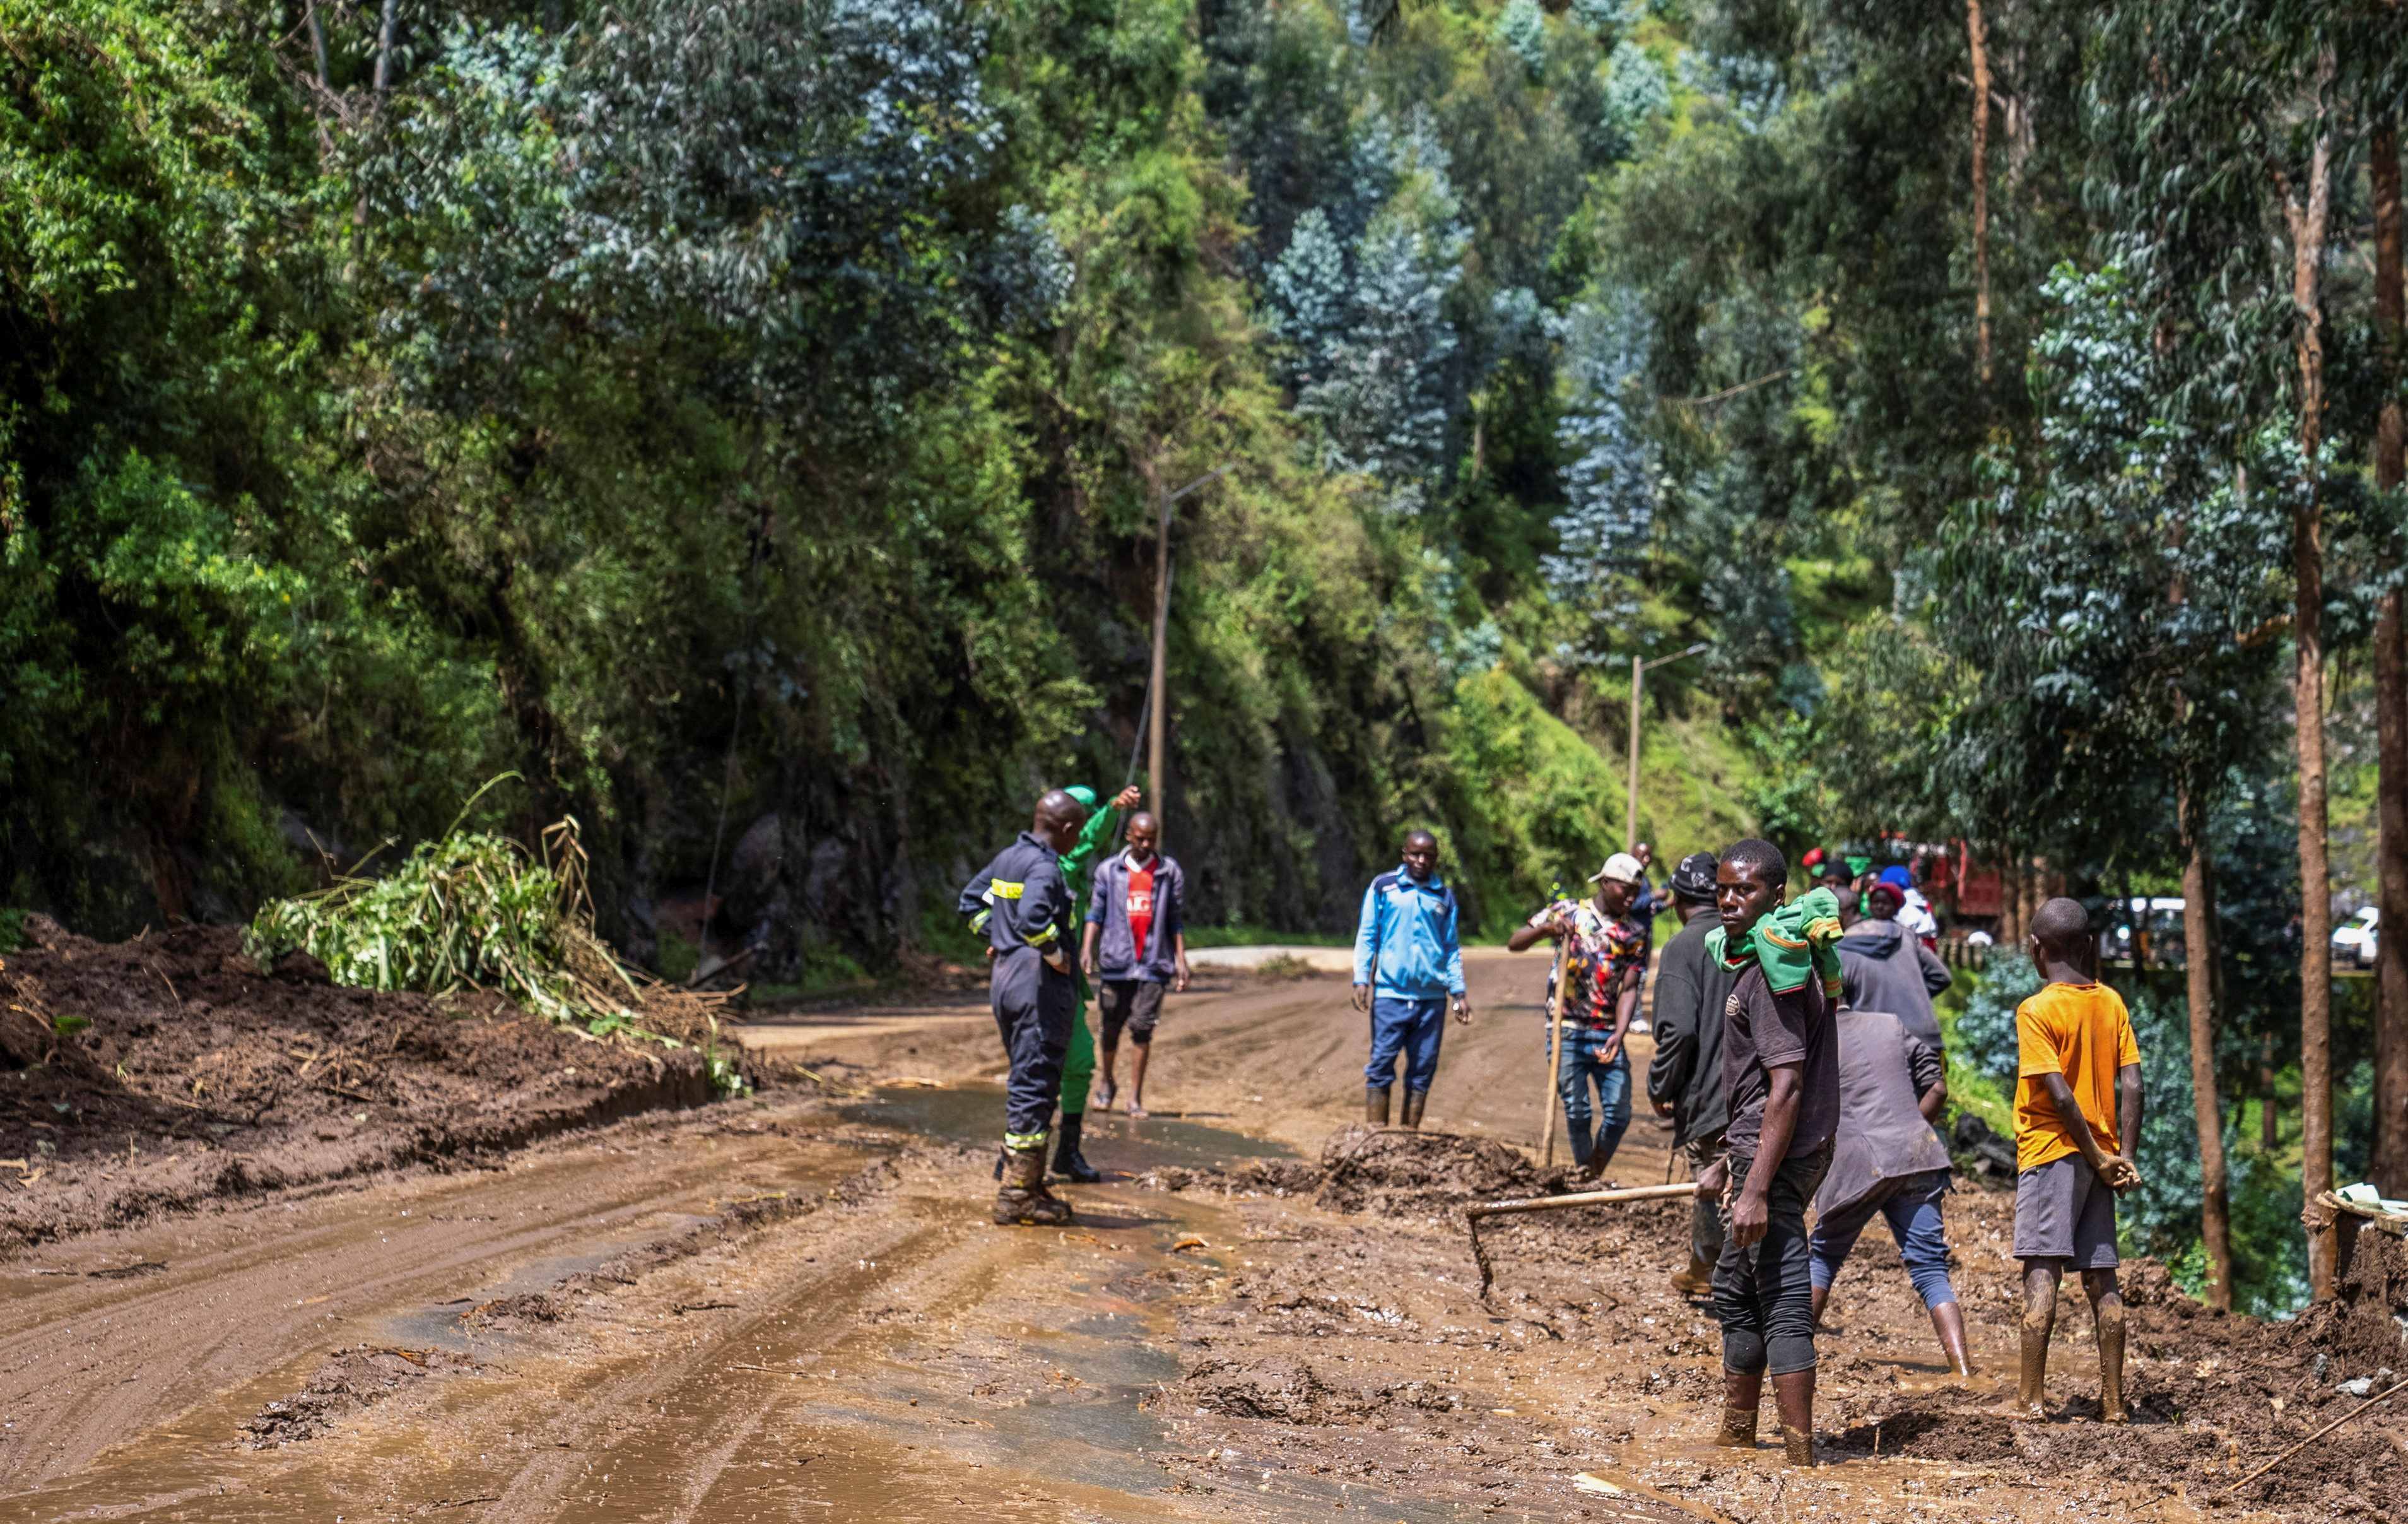 Residents clear mud from the road following rains that triggered flooding and landslides in Rubavu district